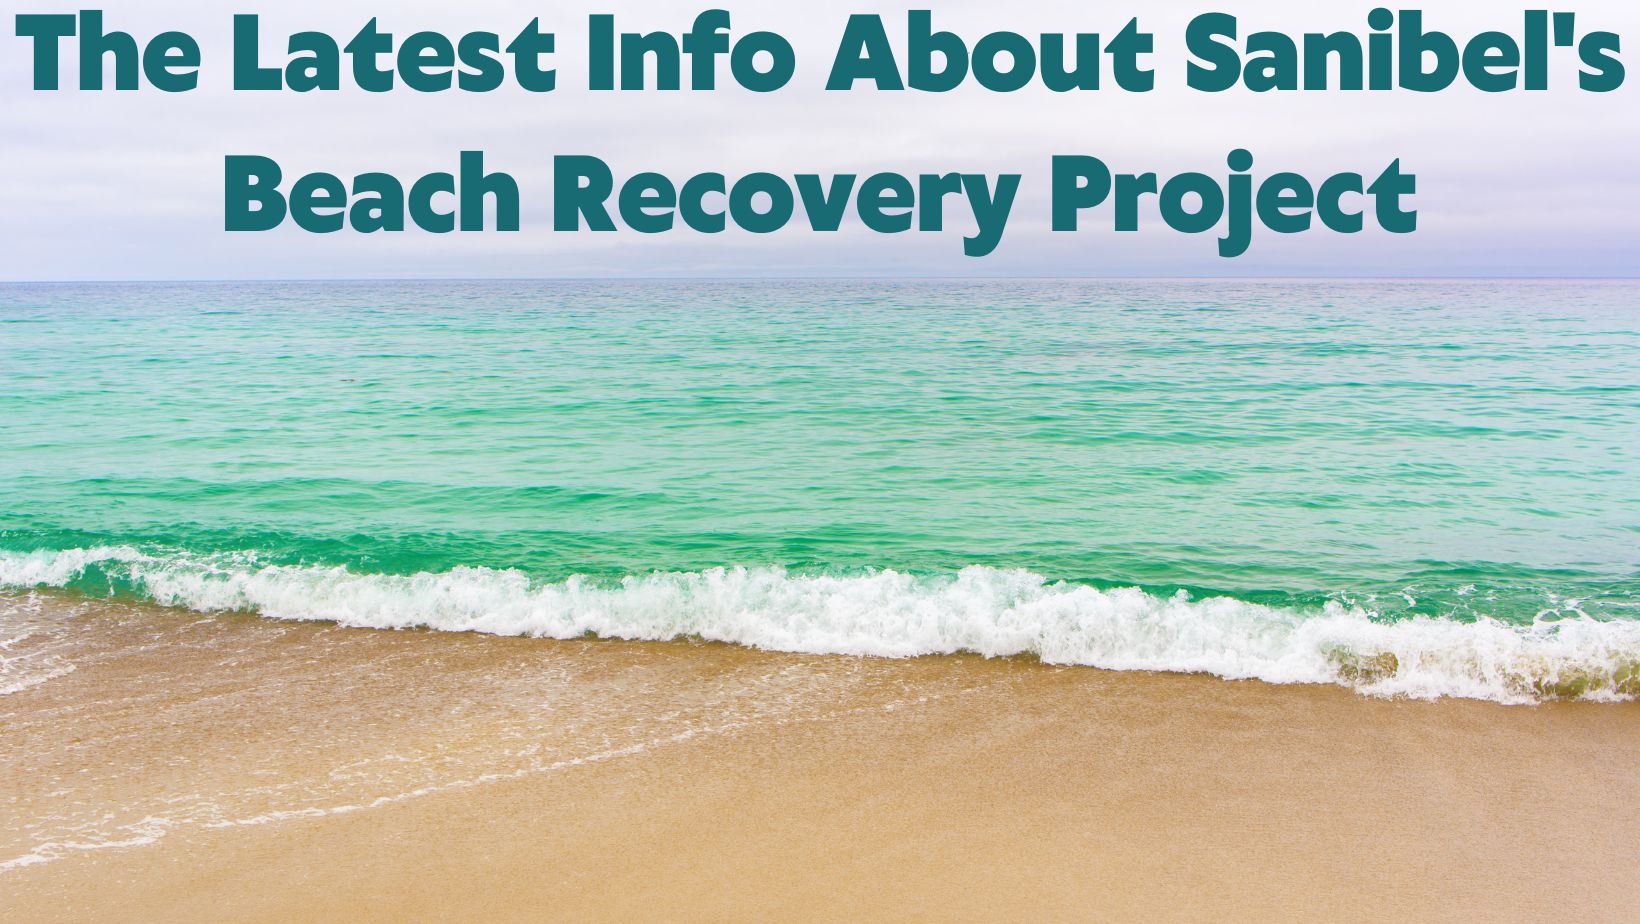 The Latest Info About Sanibel's Beach Recovery Project